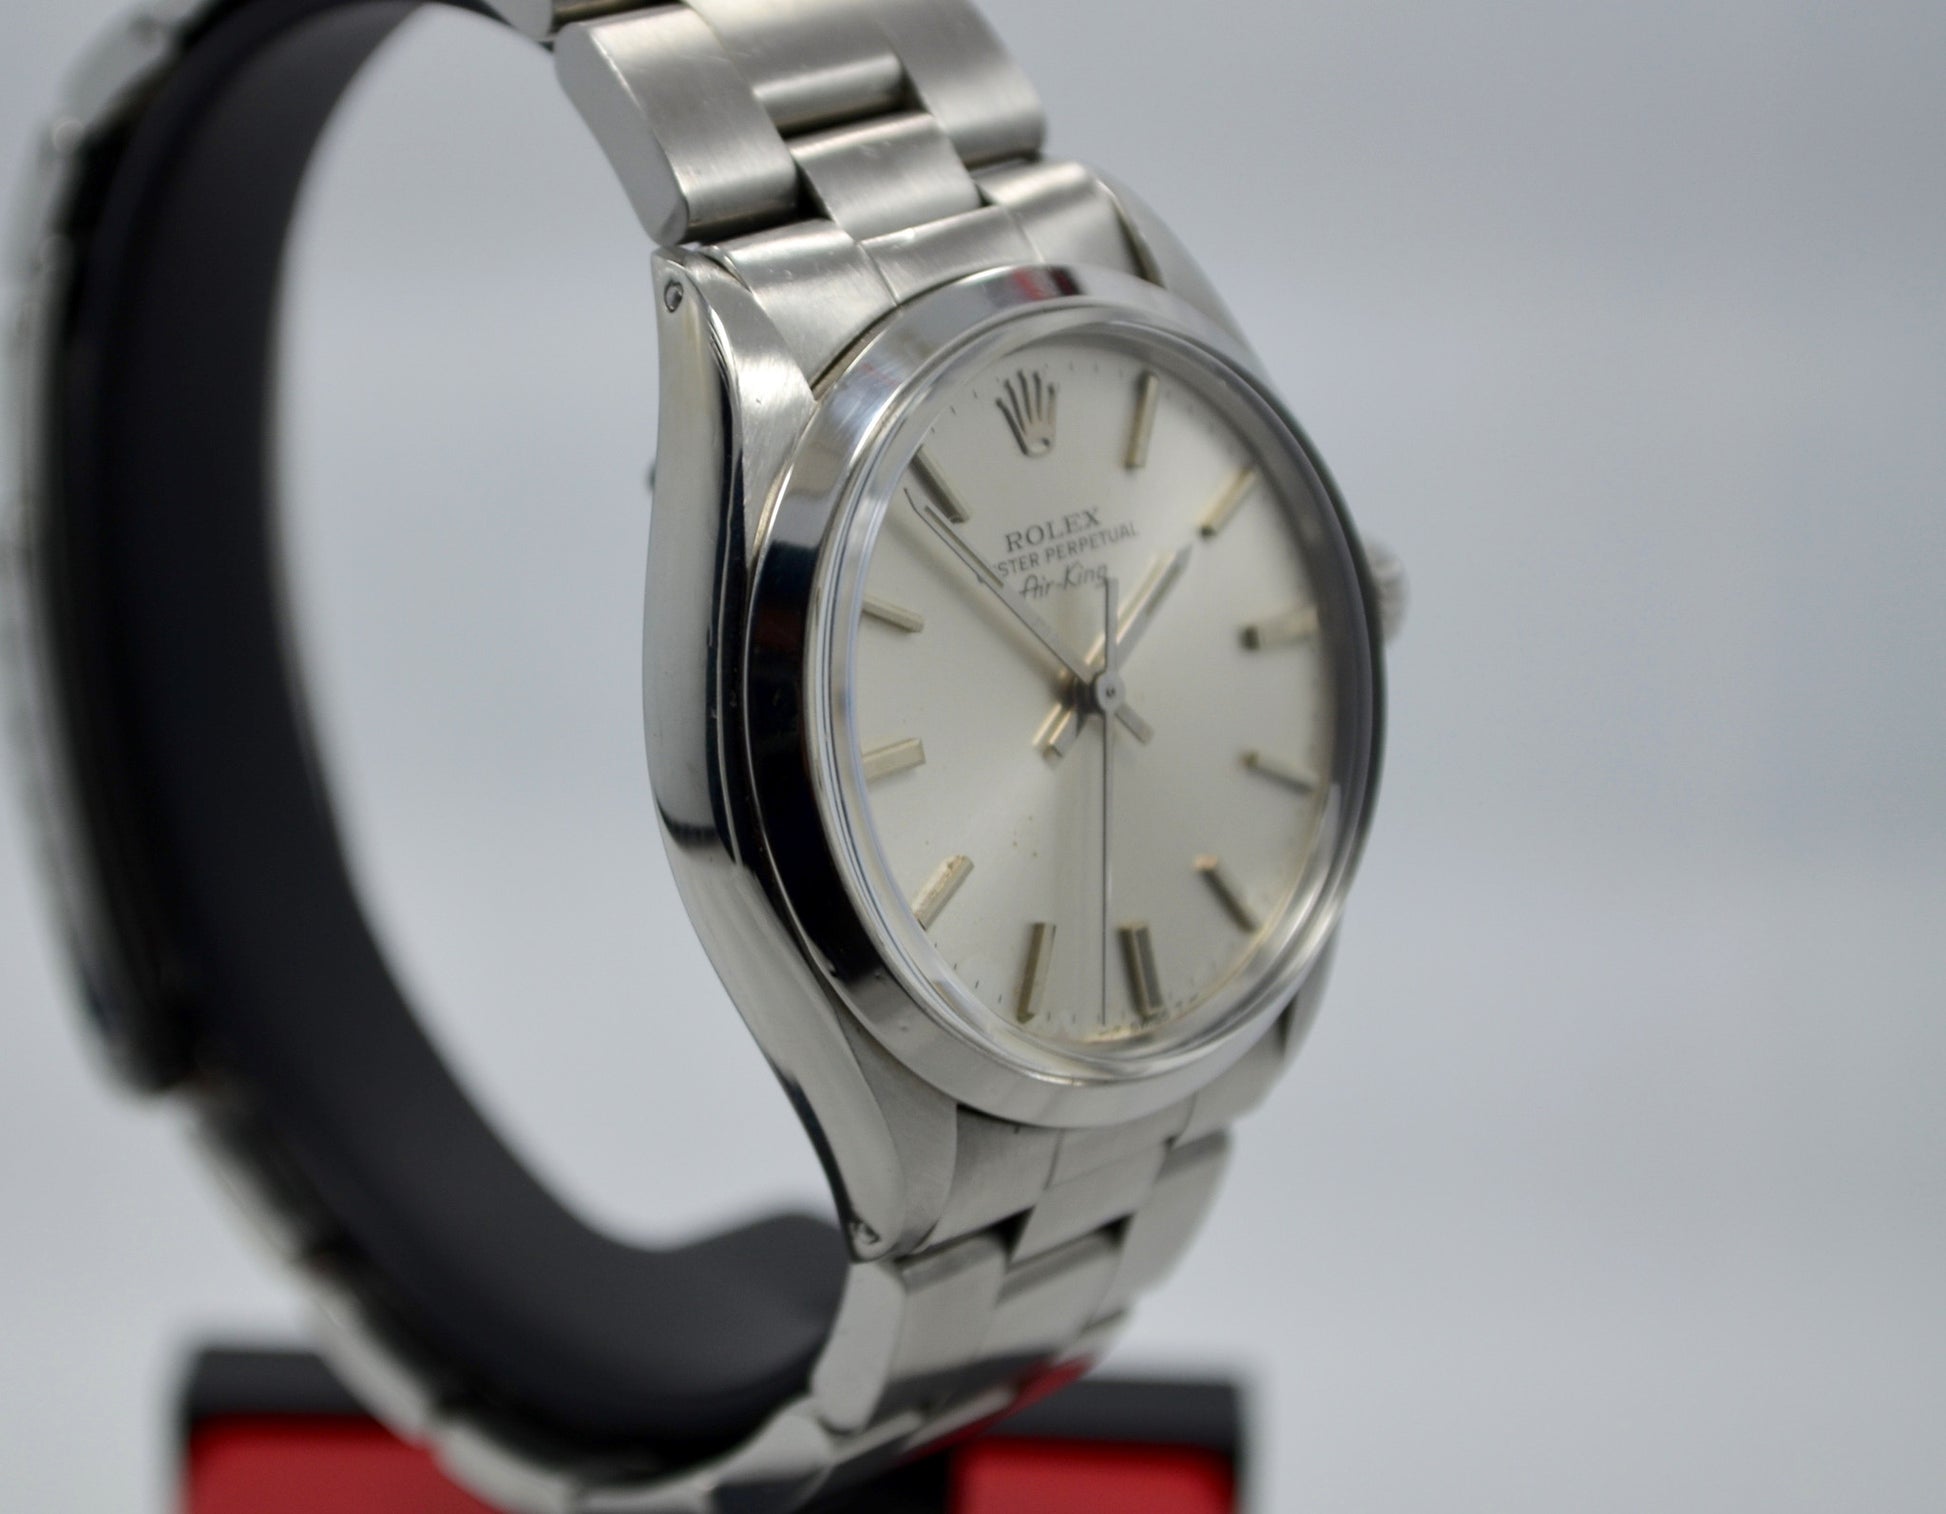 Vintage Rolex Oyster Perpetual Air King 5500 Steel Cal. 1520 Automatic Watch - Hashtag Watch Company